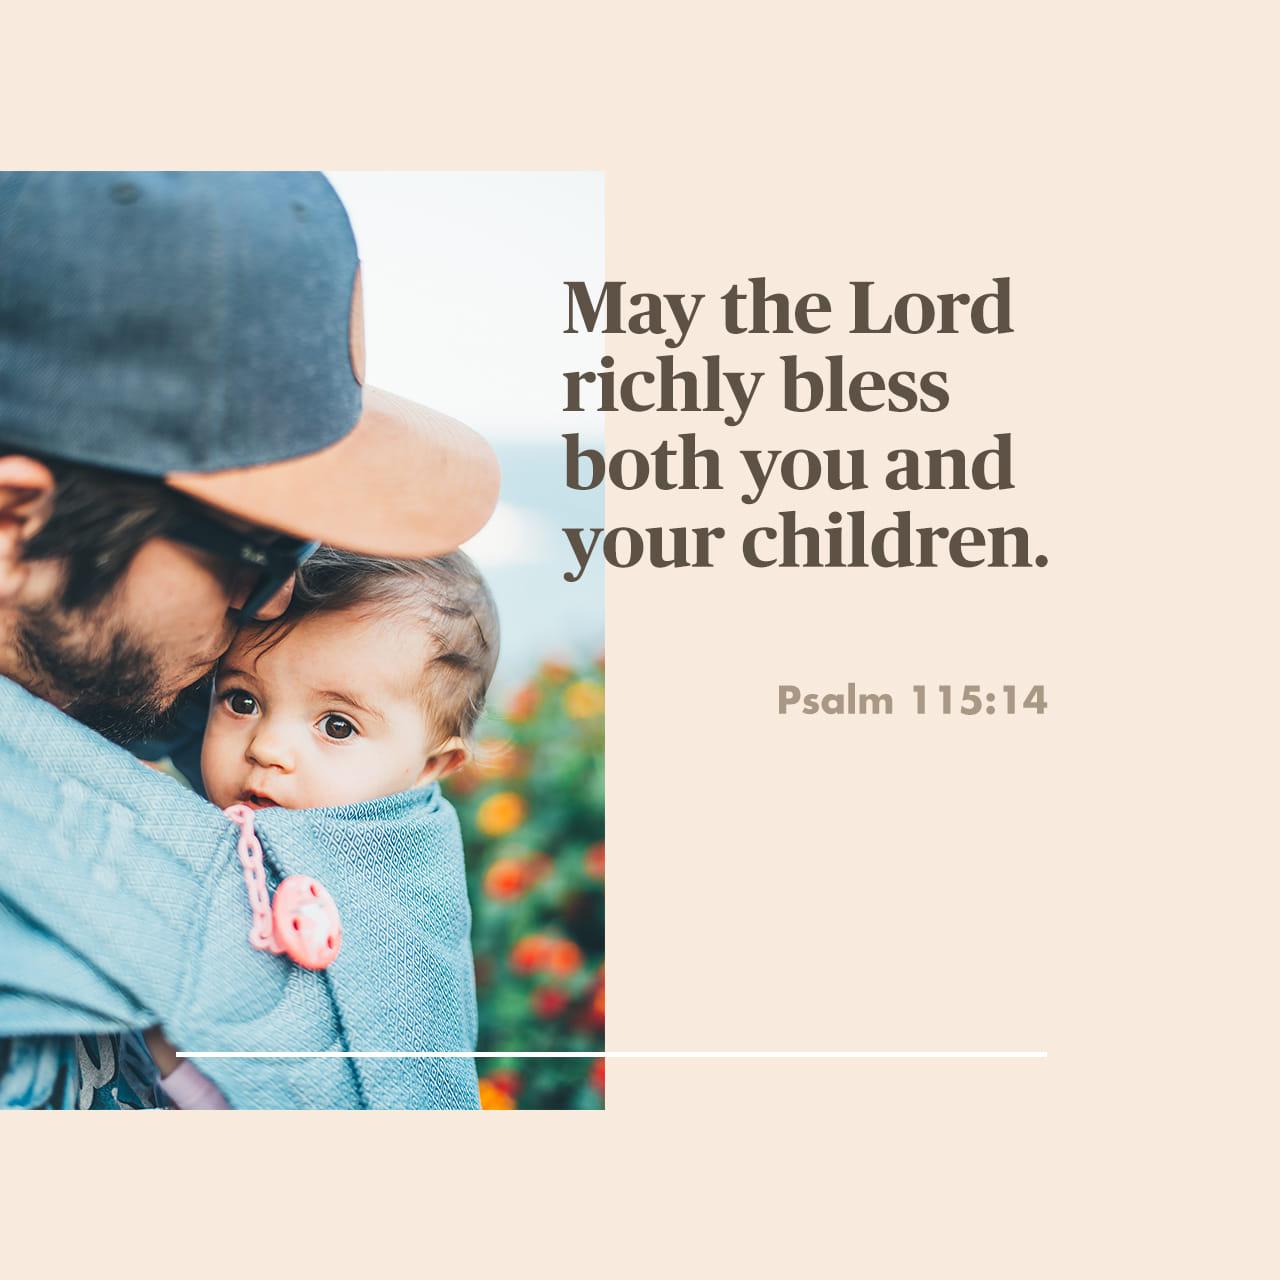 Bible Verse of the Day - day 89 - image 13742 (Psalm 115:13-16)